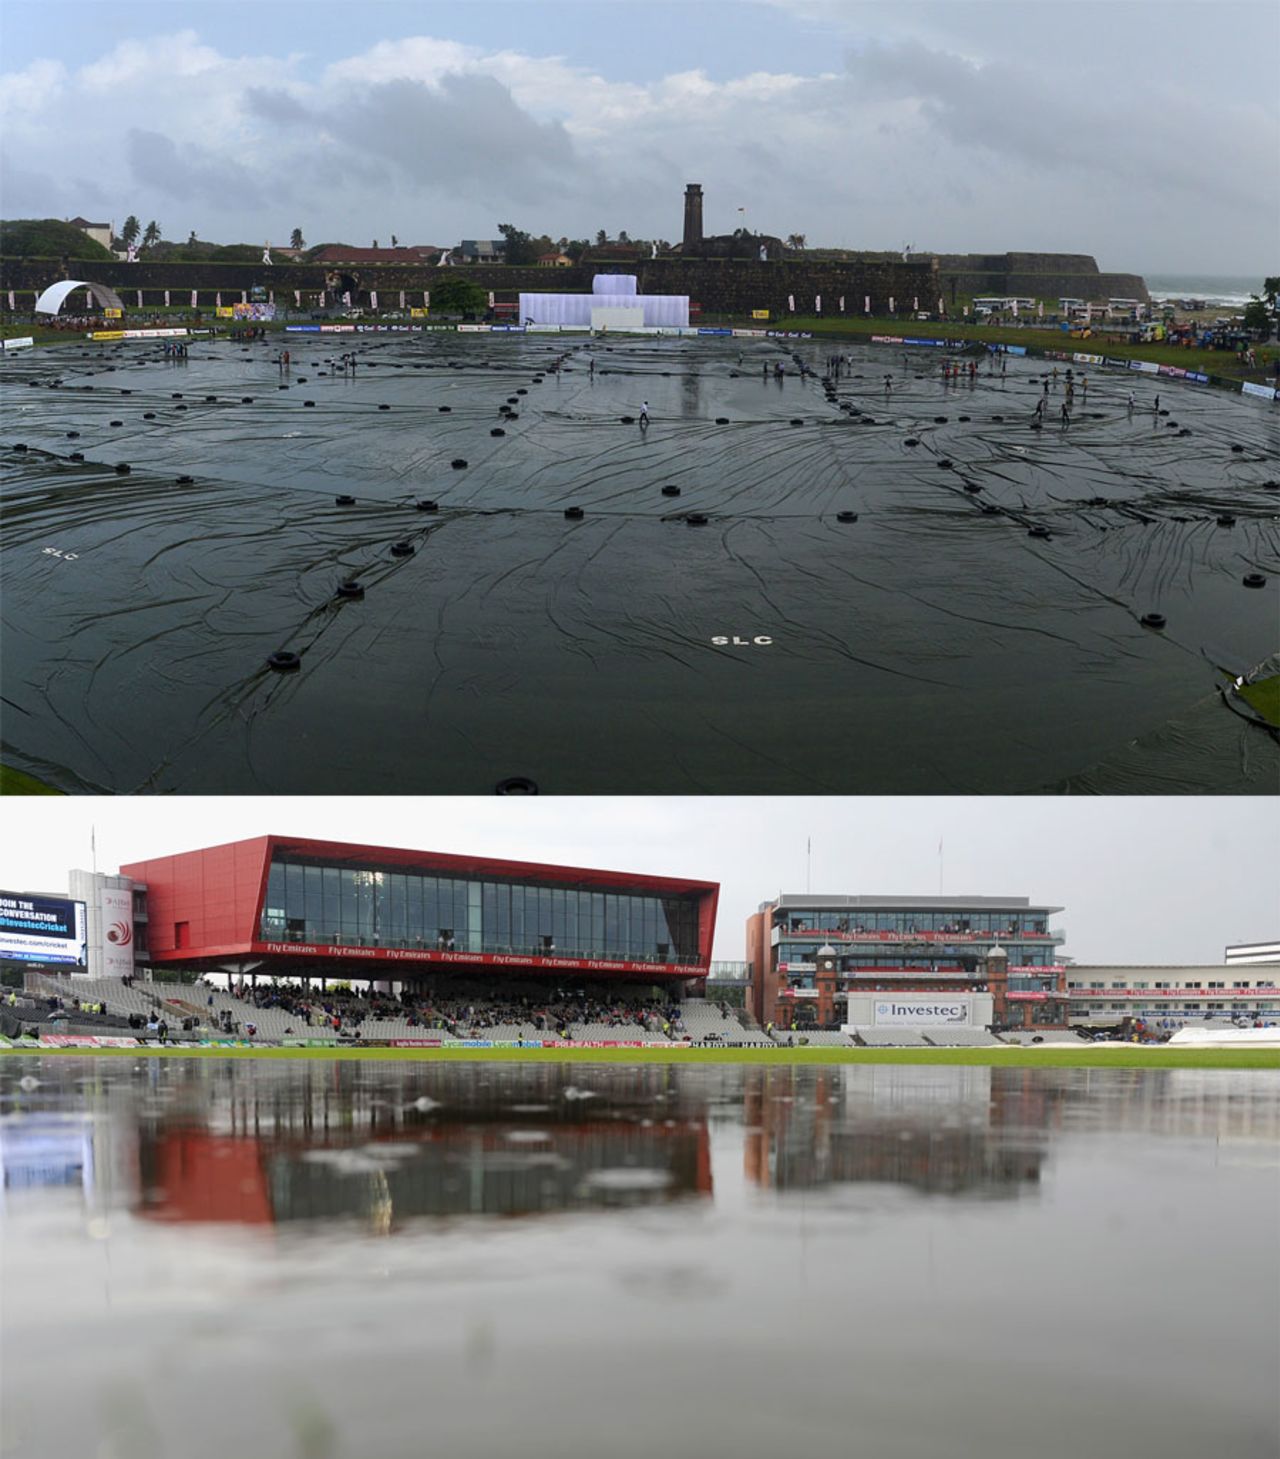 Two wet grounds: damp scenes in Galle and Manchester, England v India, 4th Test, Old Trafford, 2nd day, August 8, 2014